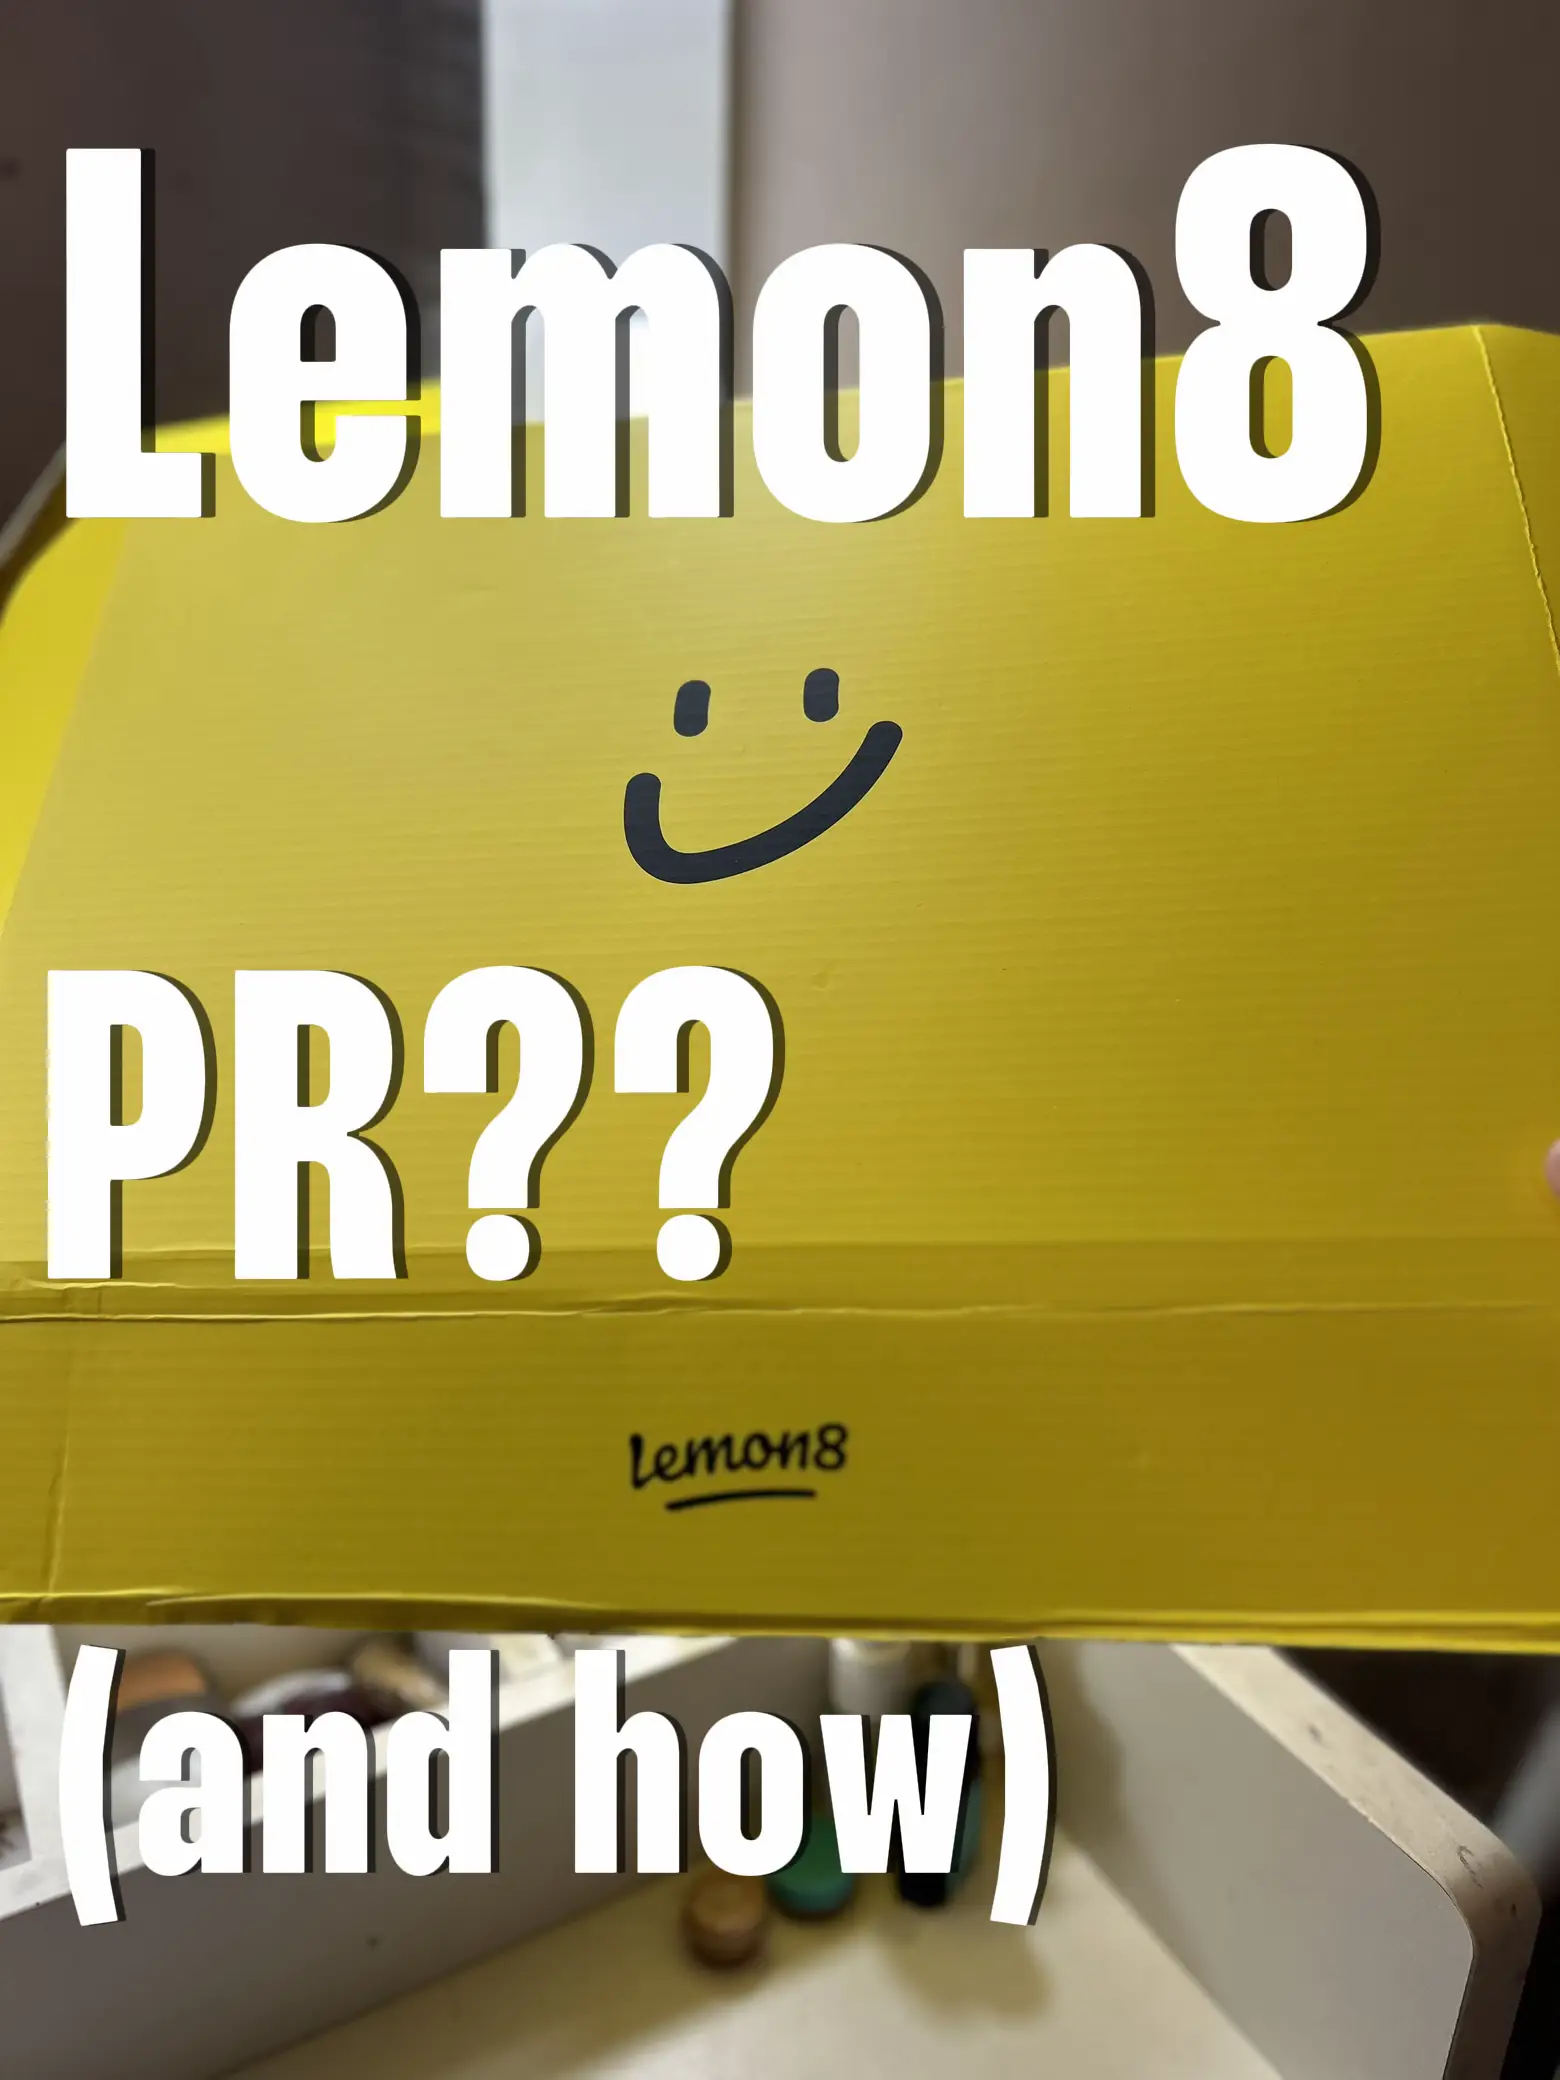 Lemon8 PR (and how to receive it!)'s images